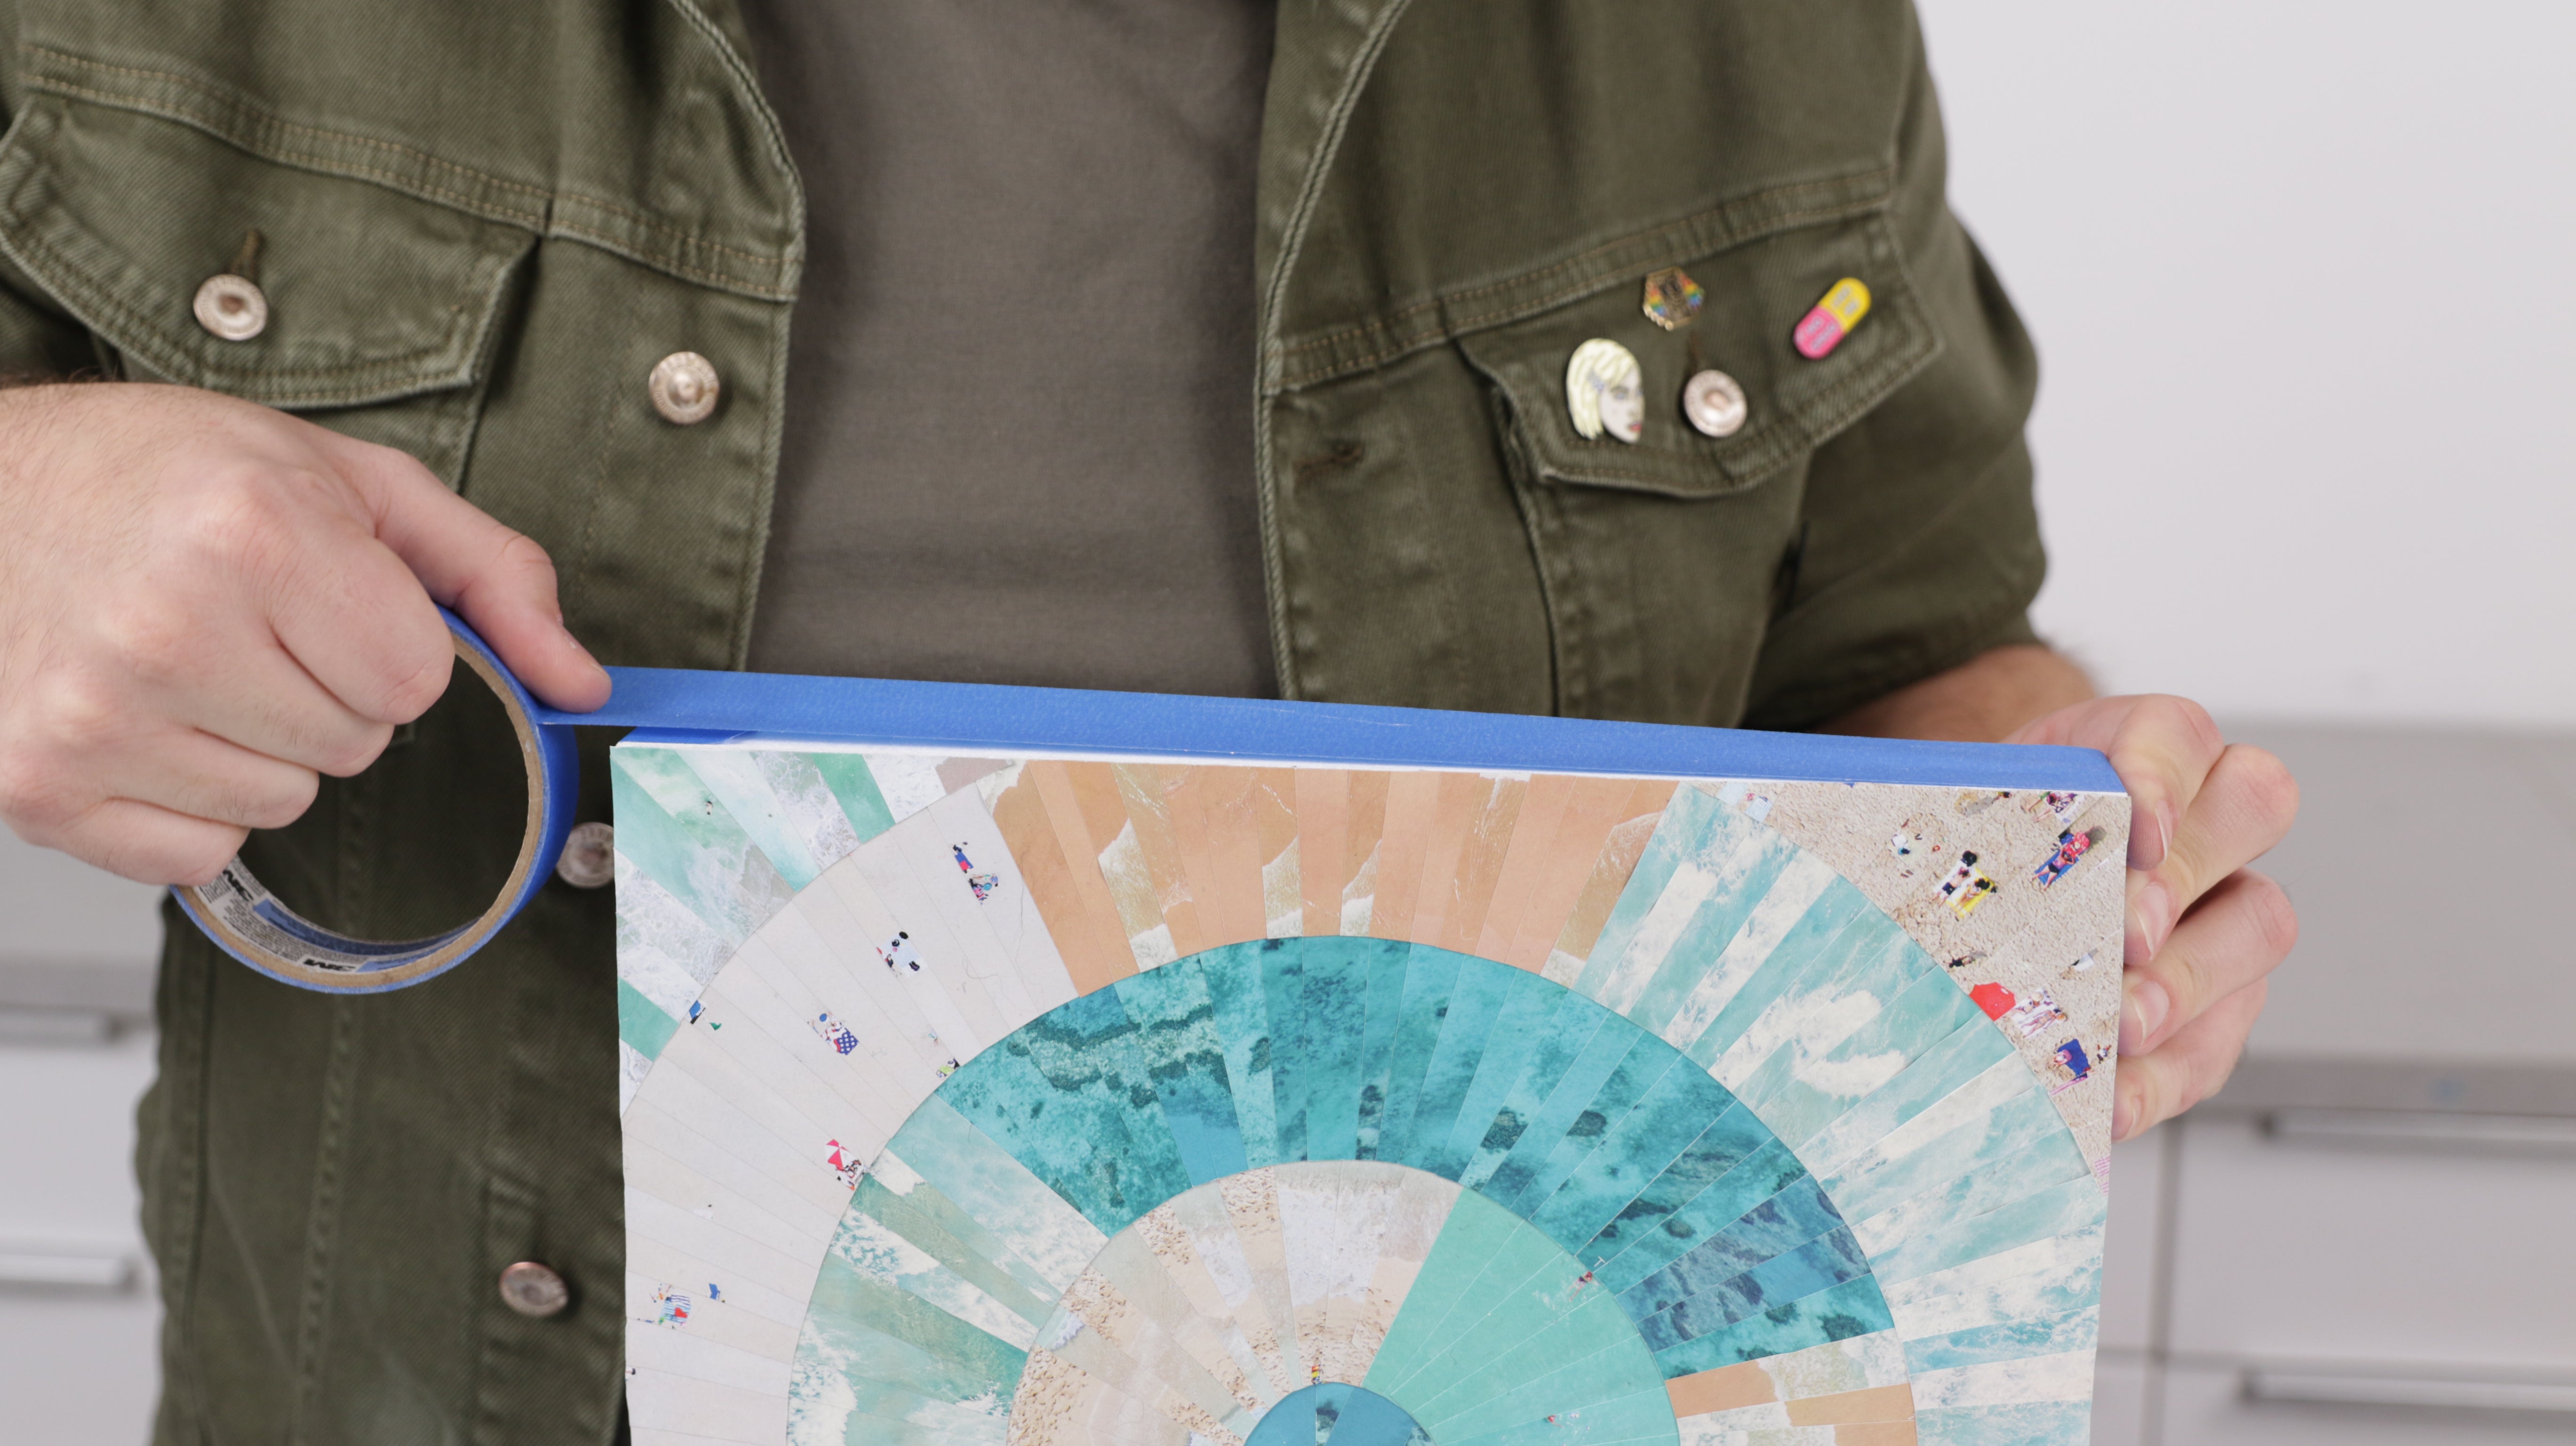 how to resin paper collage art: tape off the edges of the panel to protect from resin